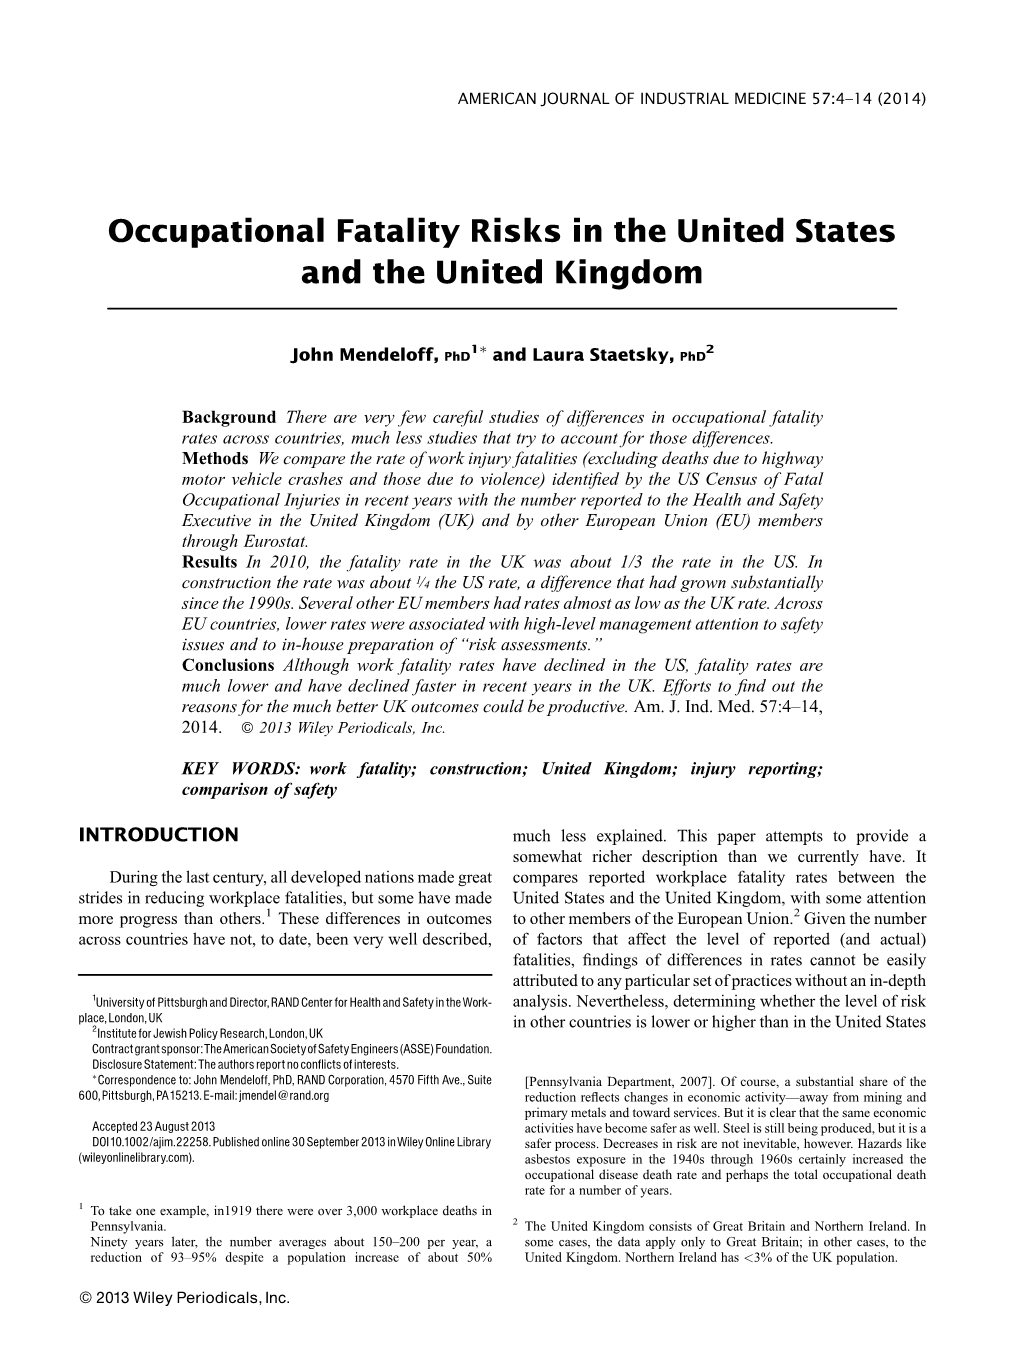 Occupational Fatality Risks in the United States and the United Kingdom